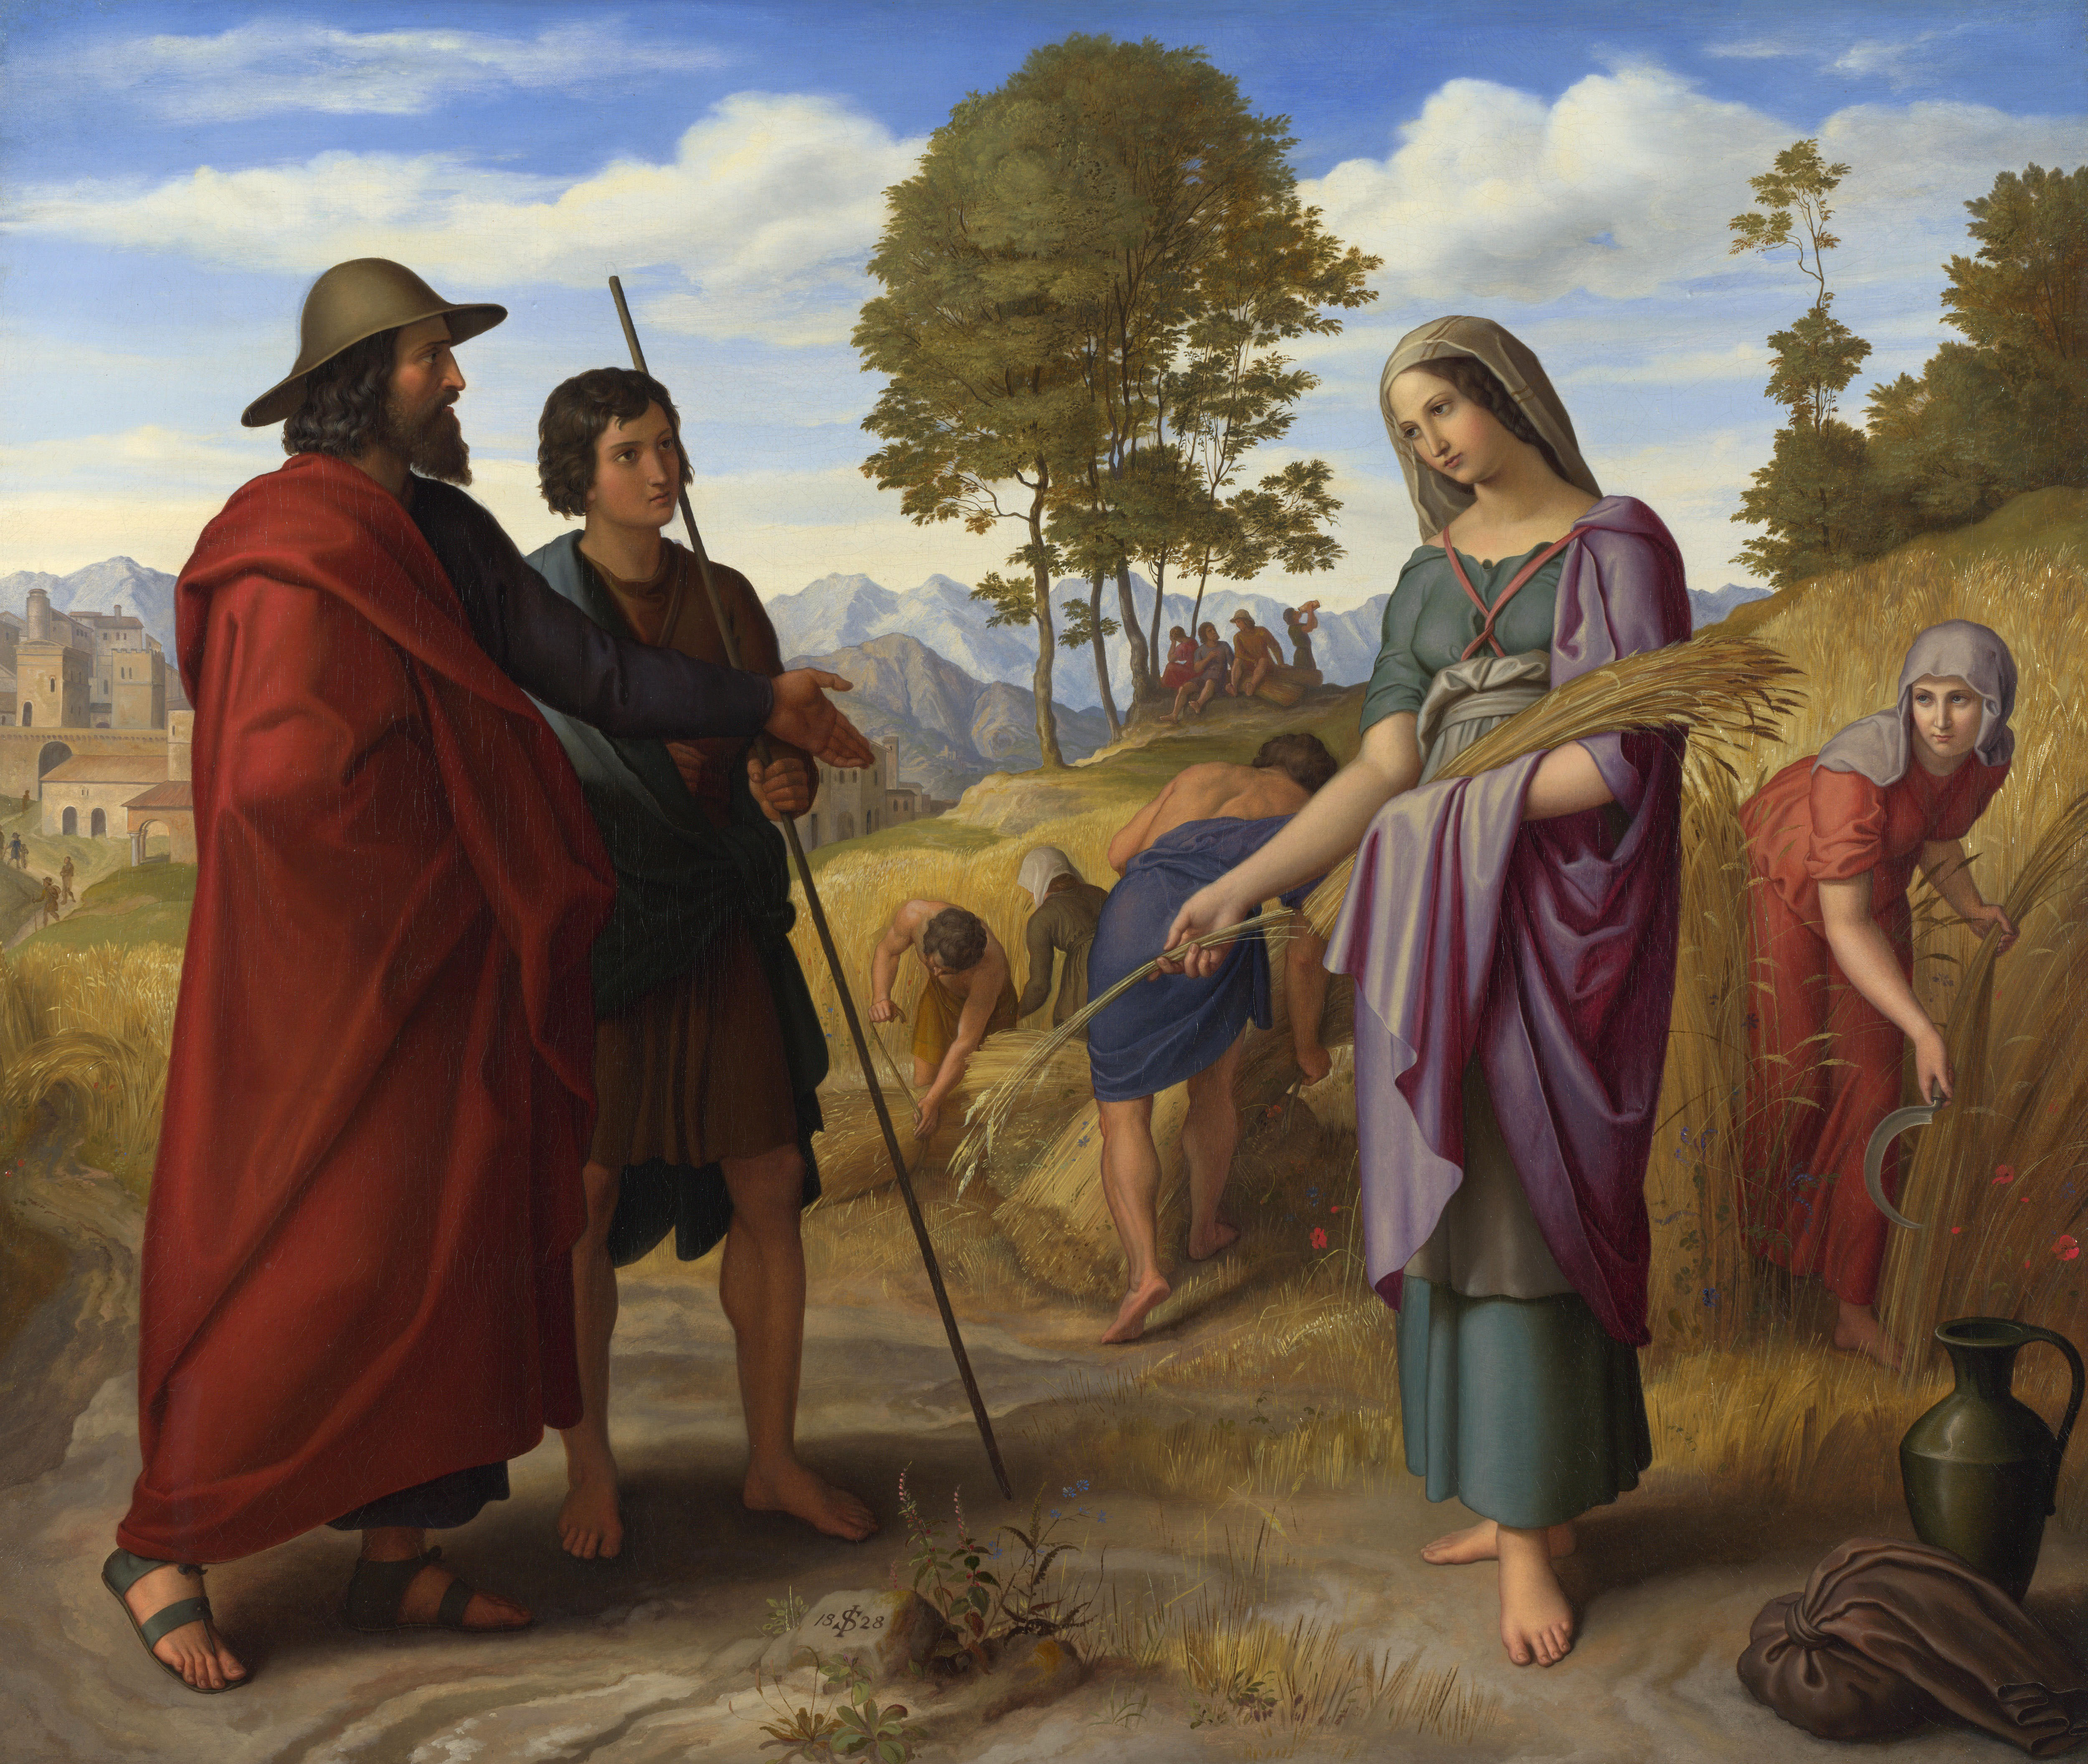 The Book of Ruth (Text & Audio)